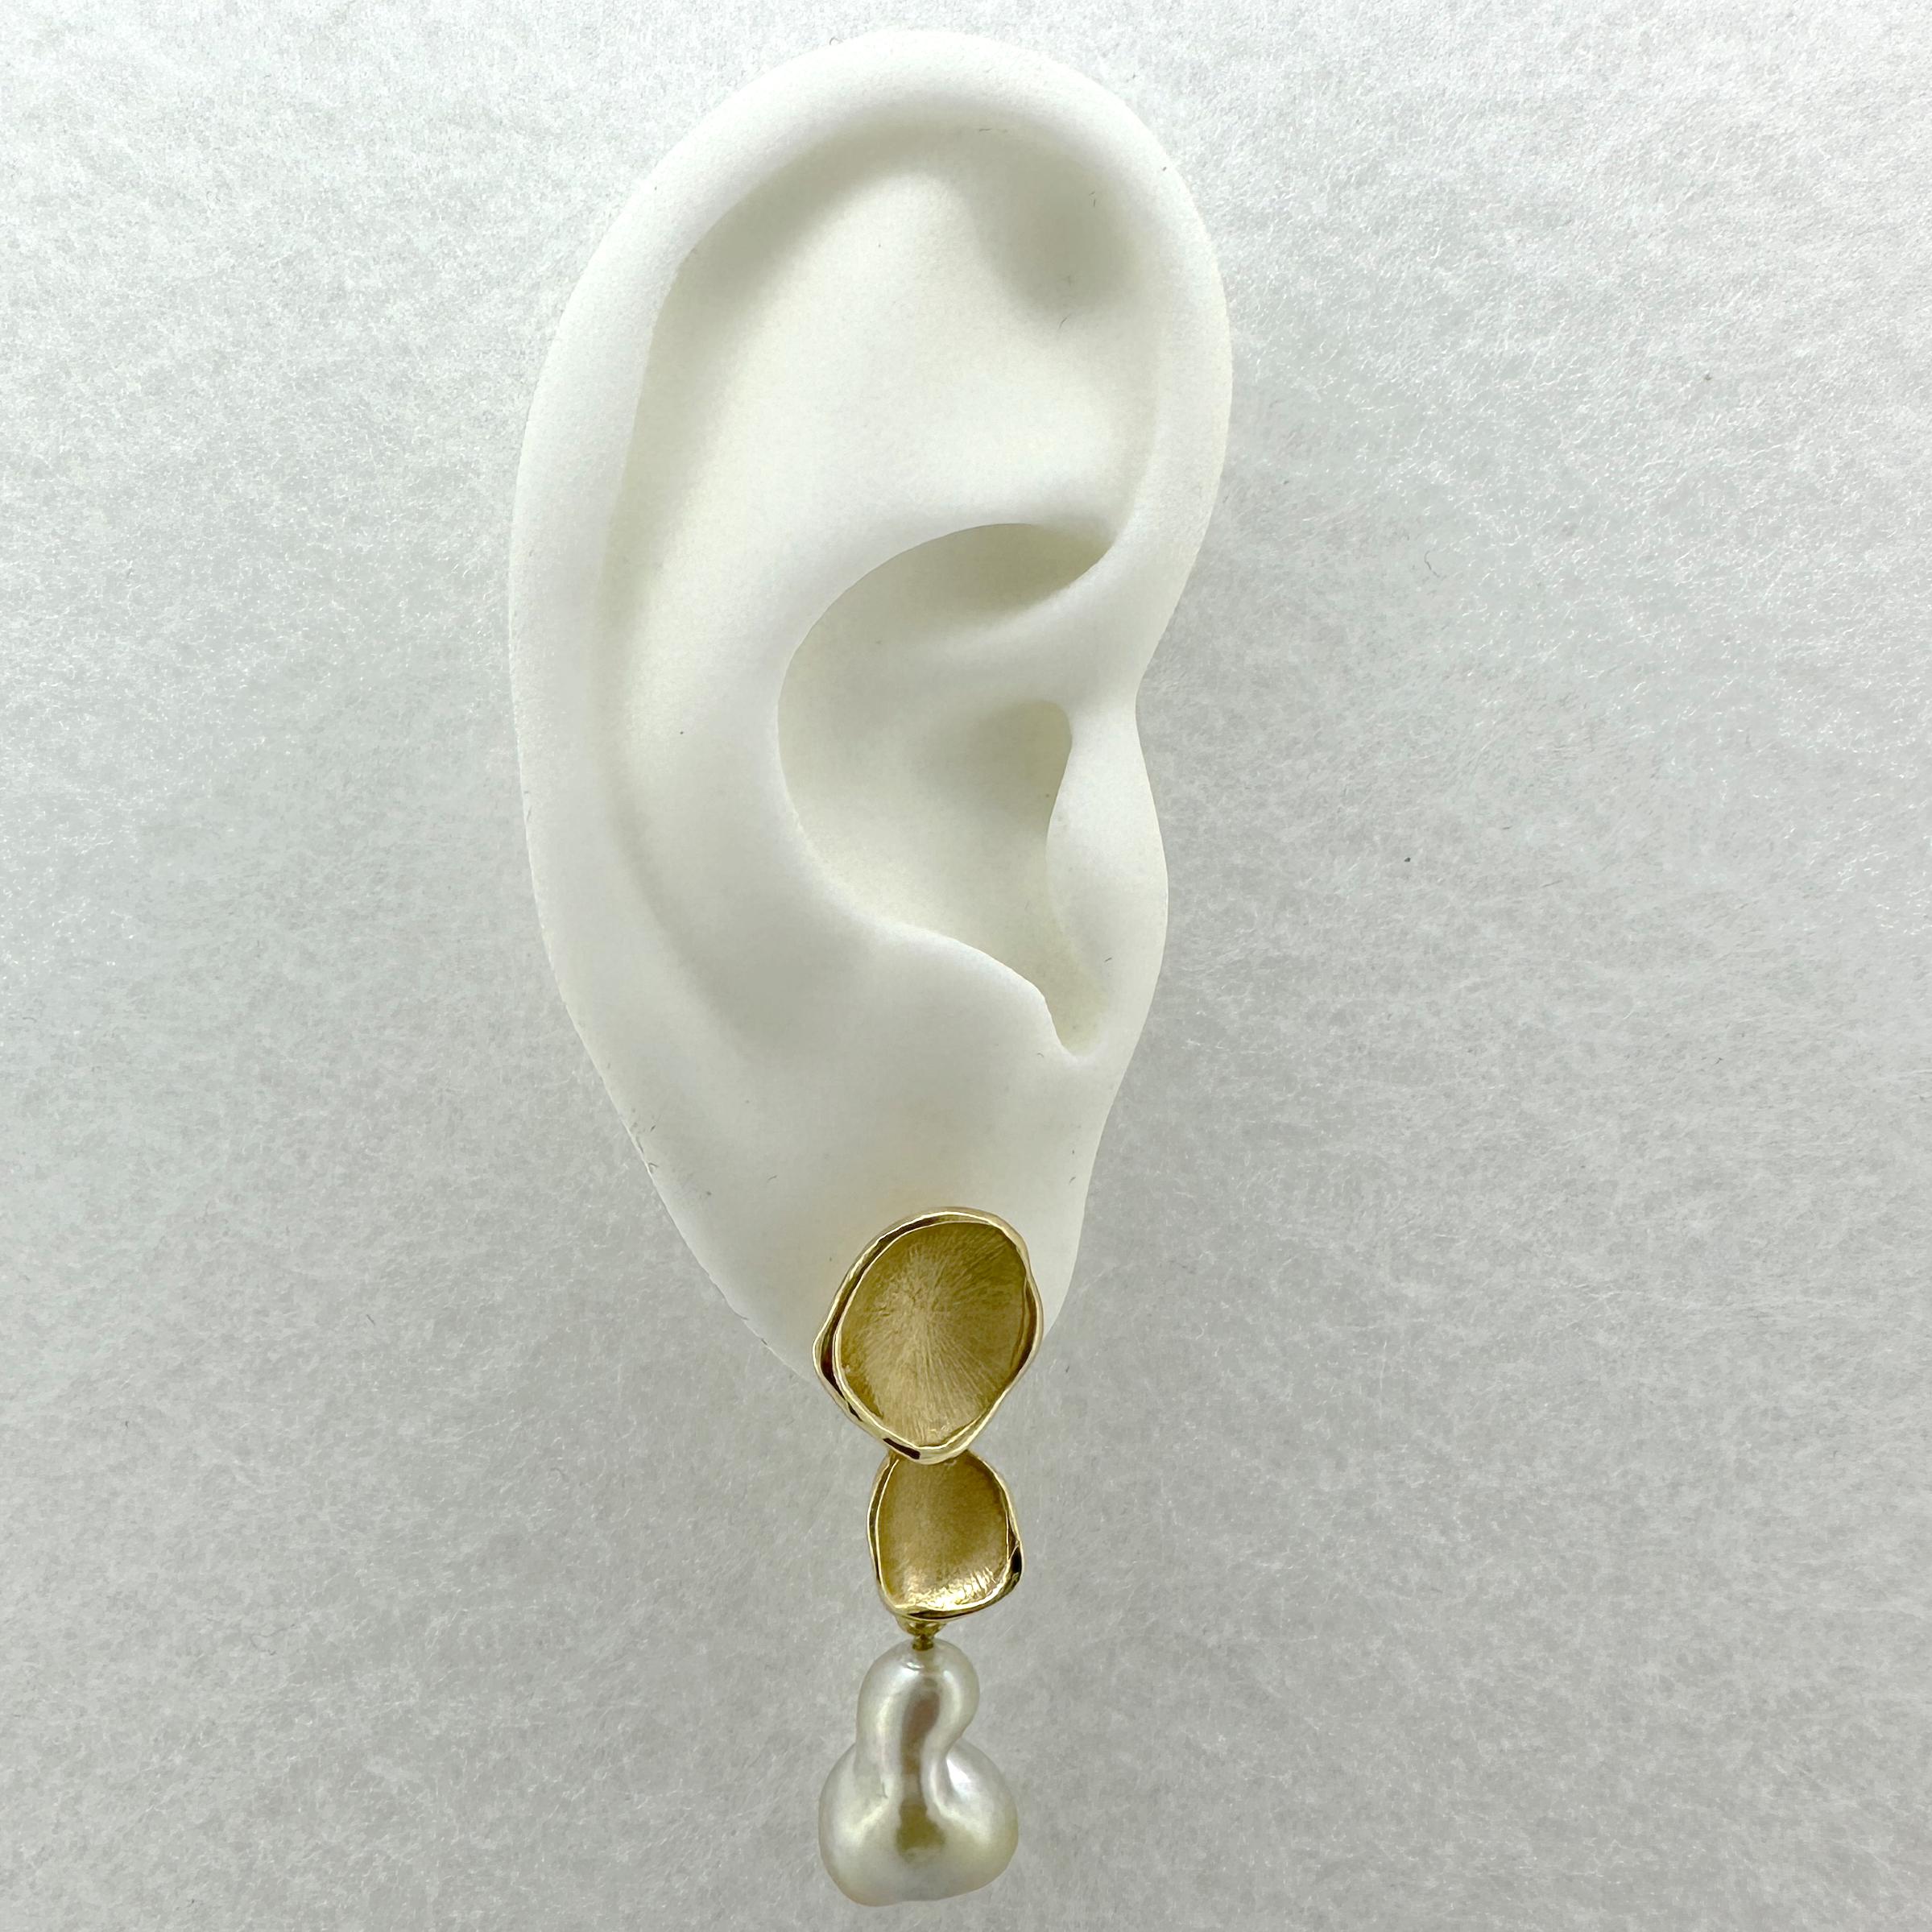 These gorgeous new earrings by Eytan Brandes feature stylized leaves of the peperomia succulent cast in 18 karat gold.  He's used this design for earrings and pendants, but usually in a long cascade of five to eight leaves in graduated sizes.  For